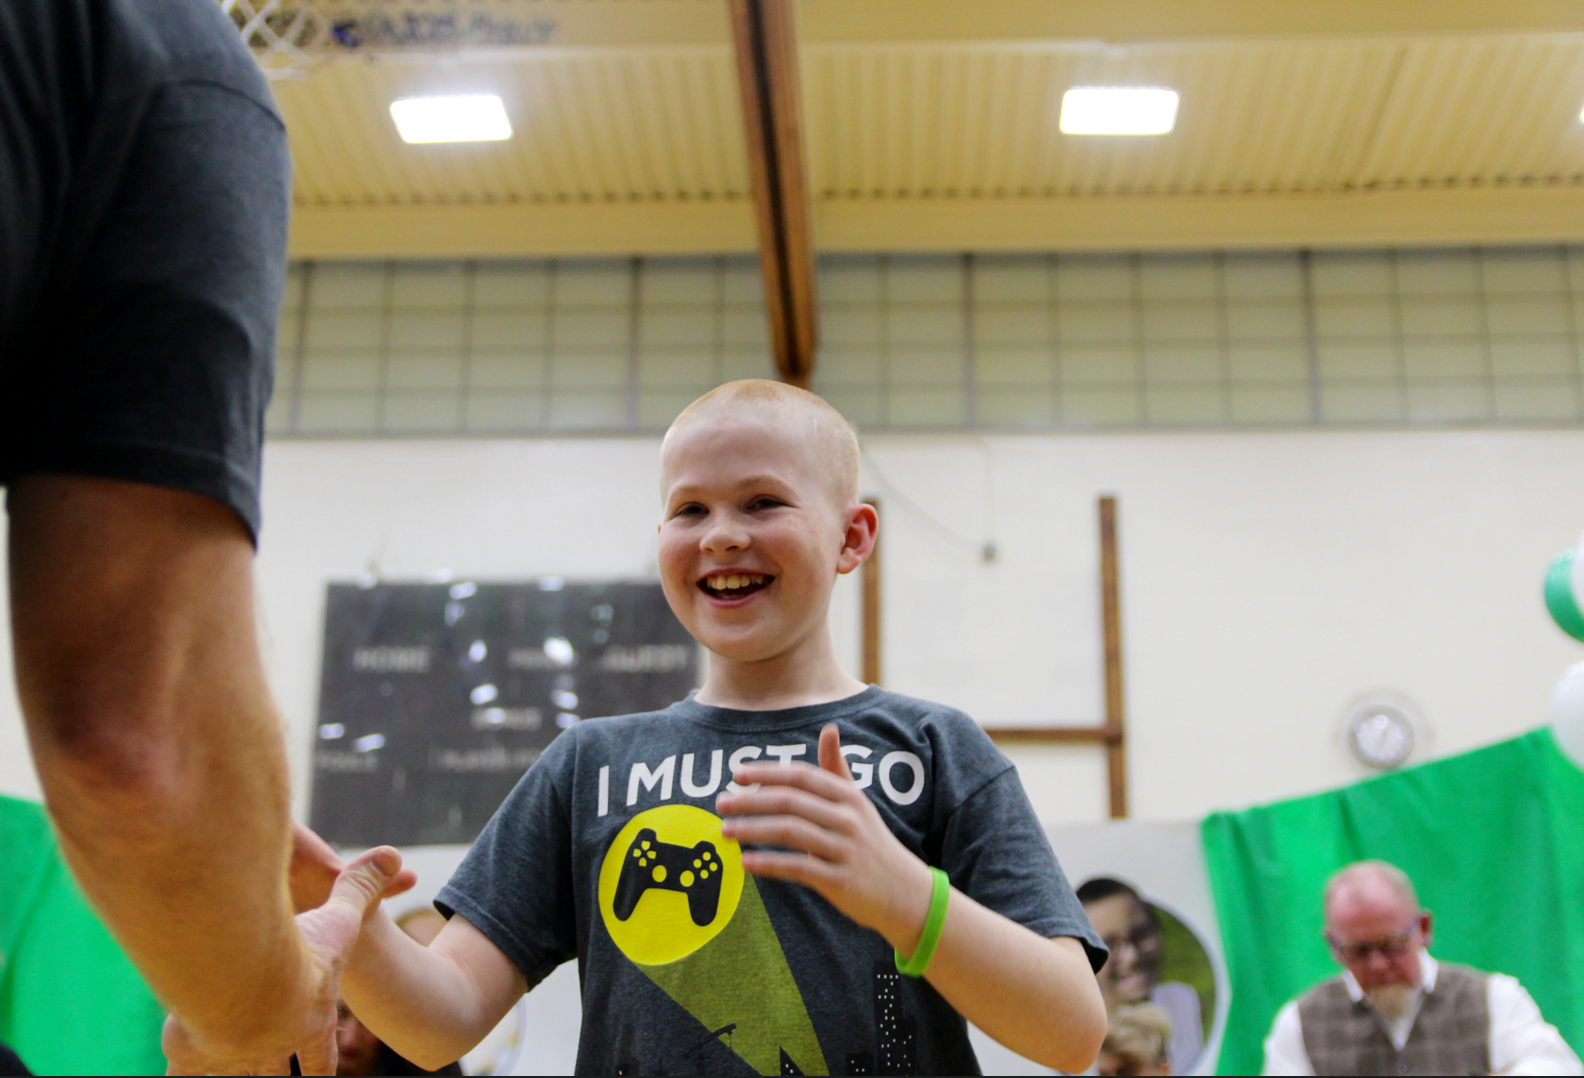 Volunteers at the St. Baldrick's head shaving event at Western Middle School on March 15, 2018 Photo: Leslie Yager